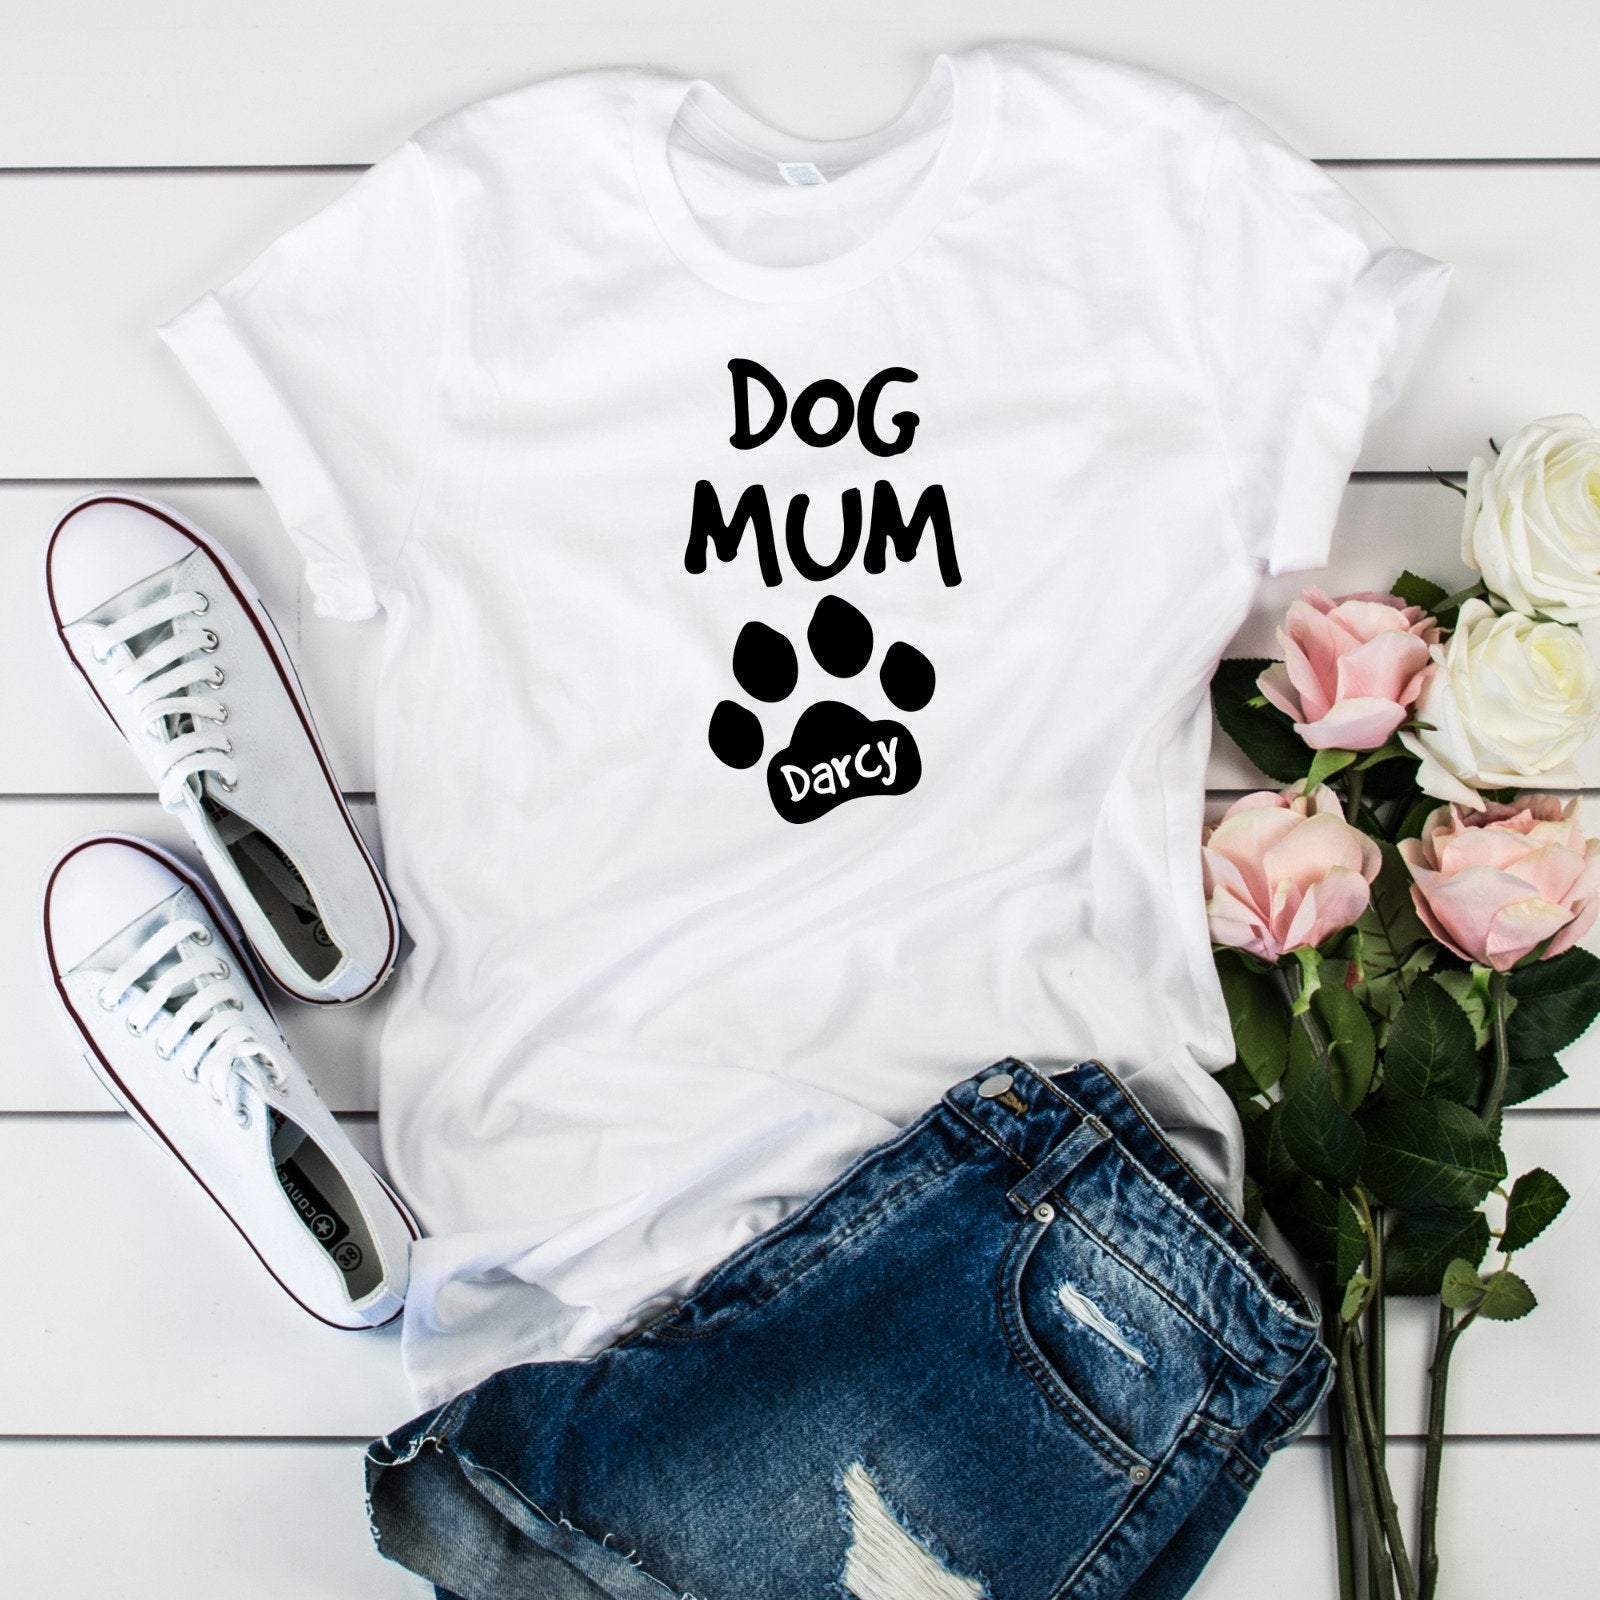 Dog mug with a dog name T-shirt, Paw prints tee, Unique gift for pet lover